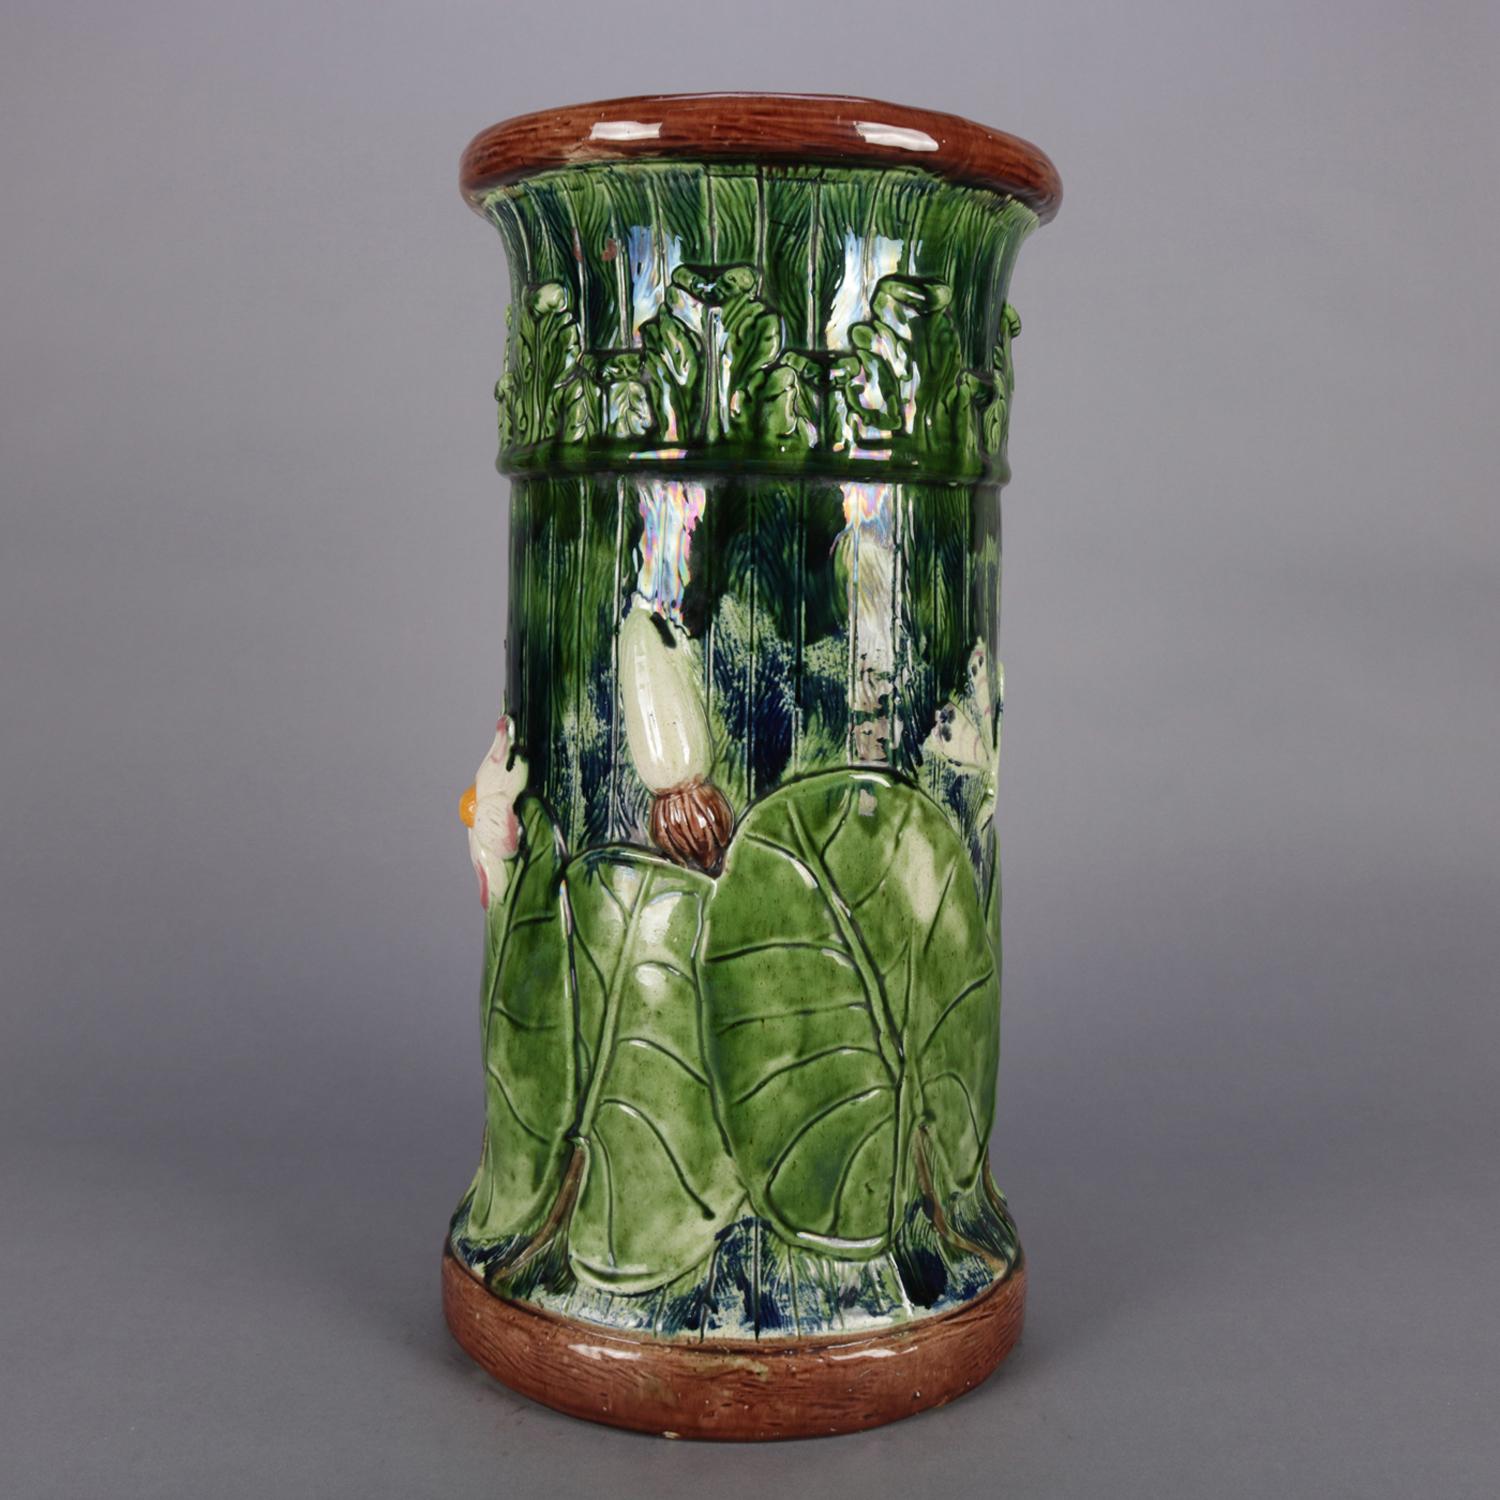 Antique Italian Majolica Aesthetic Movement art pottery umbrella stand features hand painted high relief pond or marsh scene with lily pads, dragonfly and butterfly decoration, circa 1870.

Measures: 10